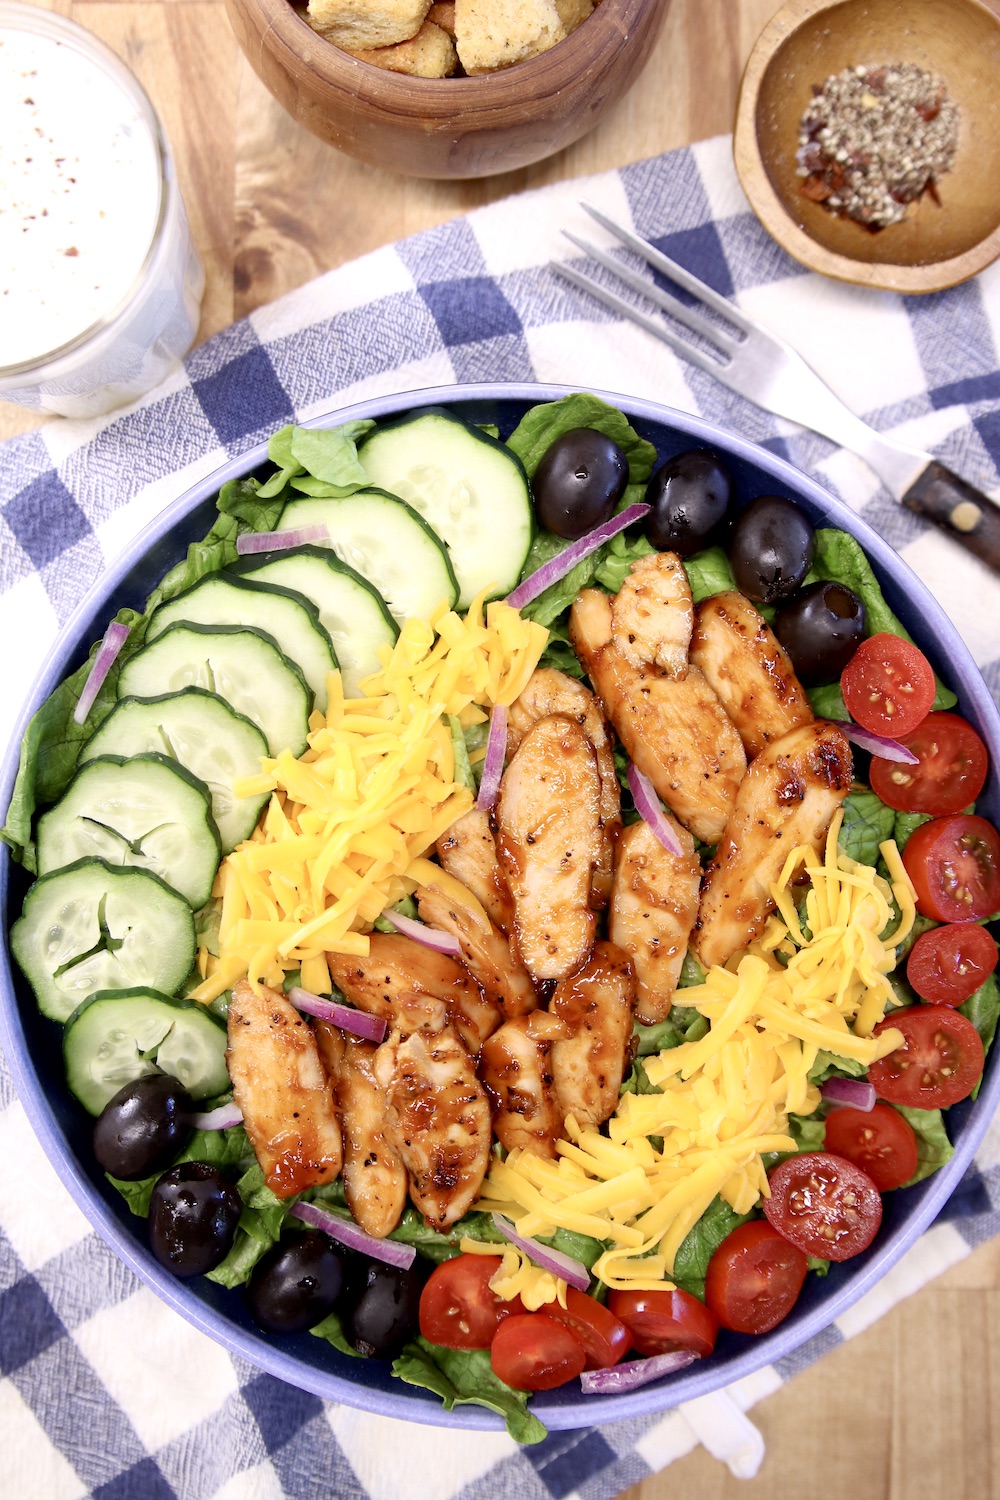 bbq chicken salad with cucumbers, tomatoes, black olives and cheese